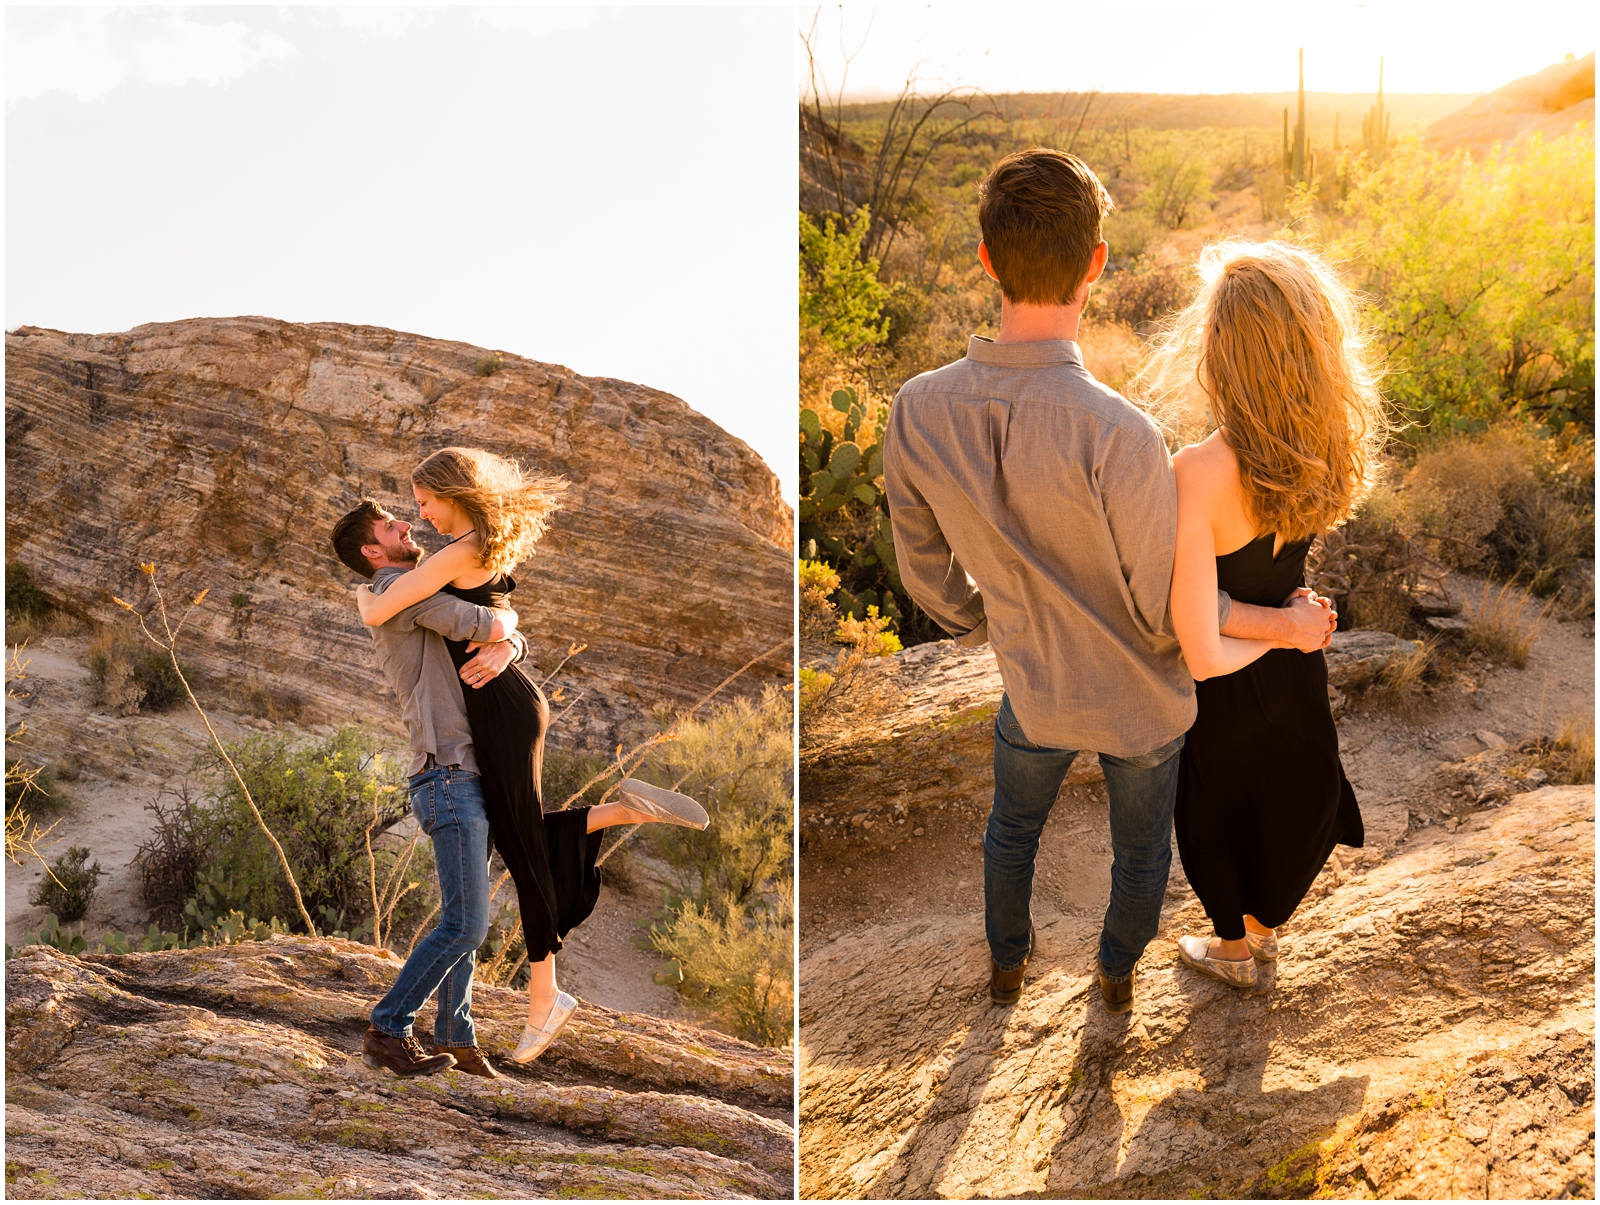 Have a ton of fun like this couple adventuring through the Arizona dessert during their adventure photography session with Clarissa Wylde Photography.